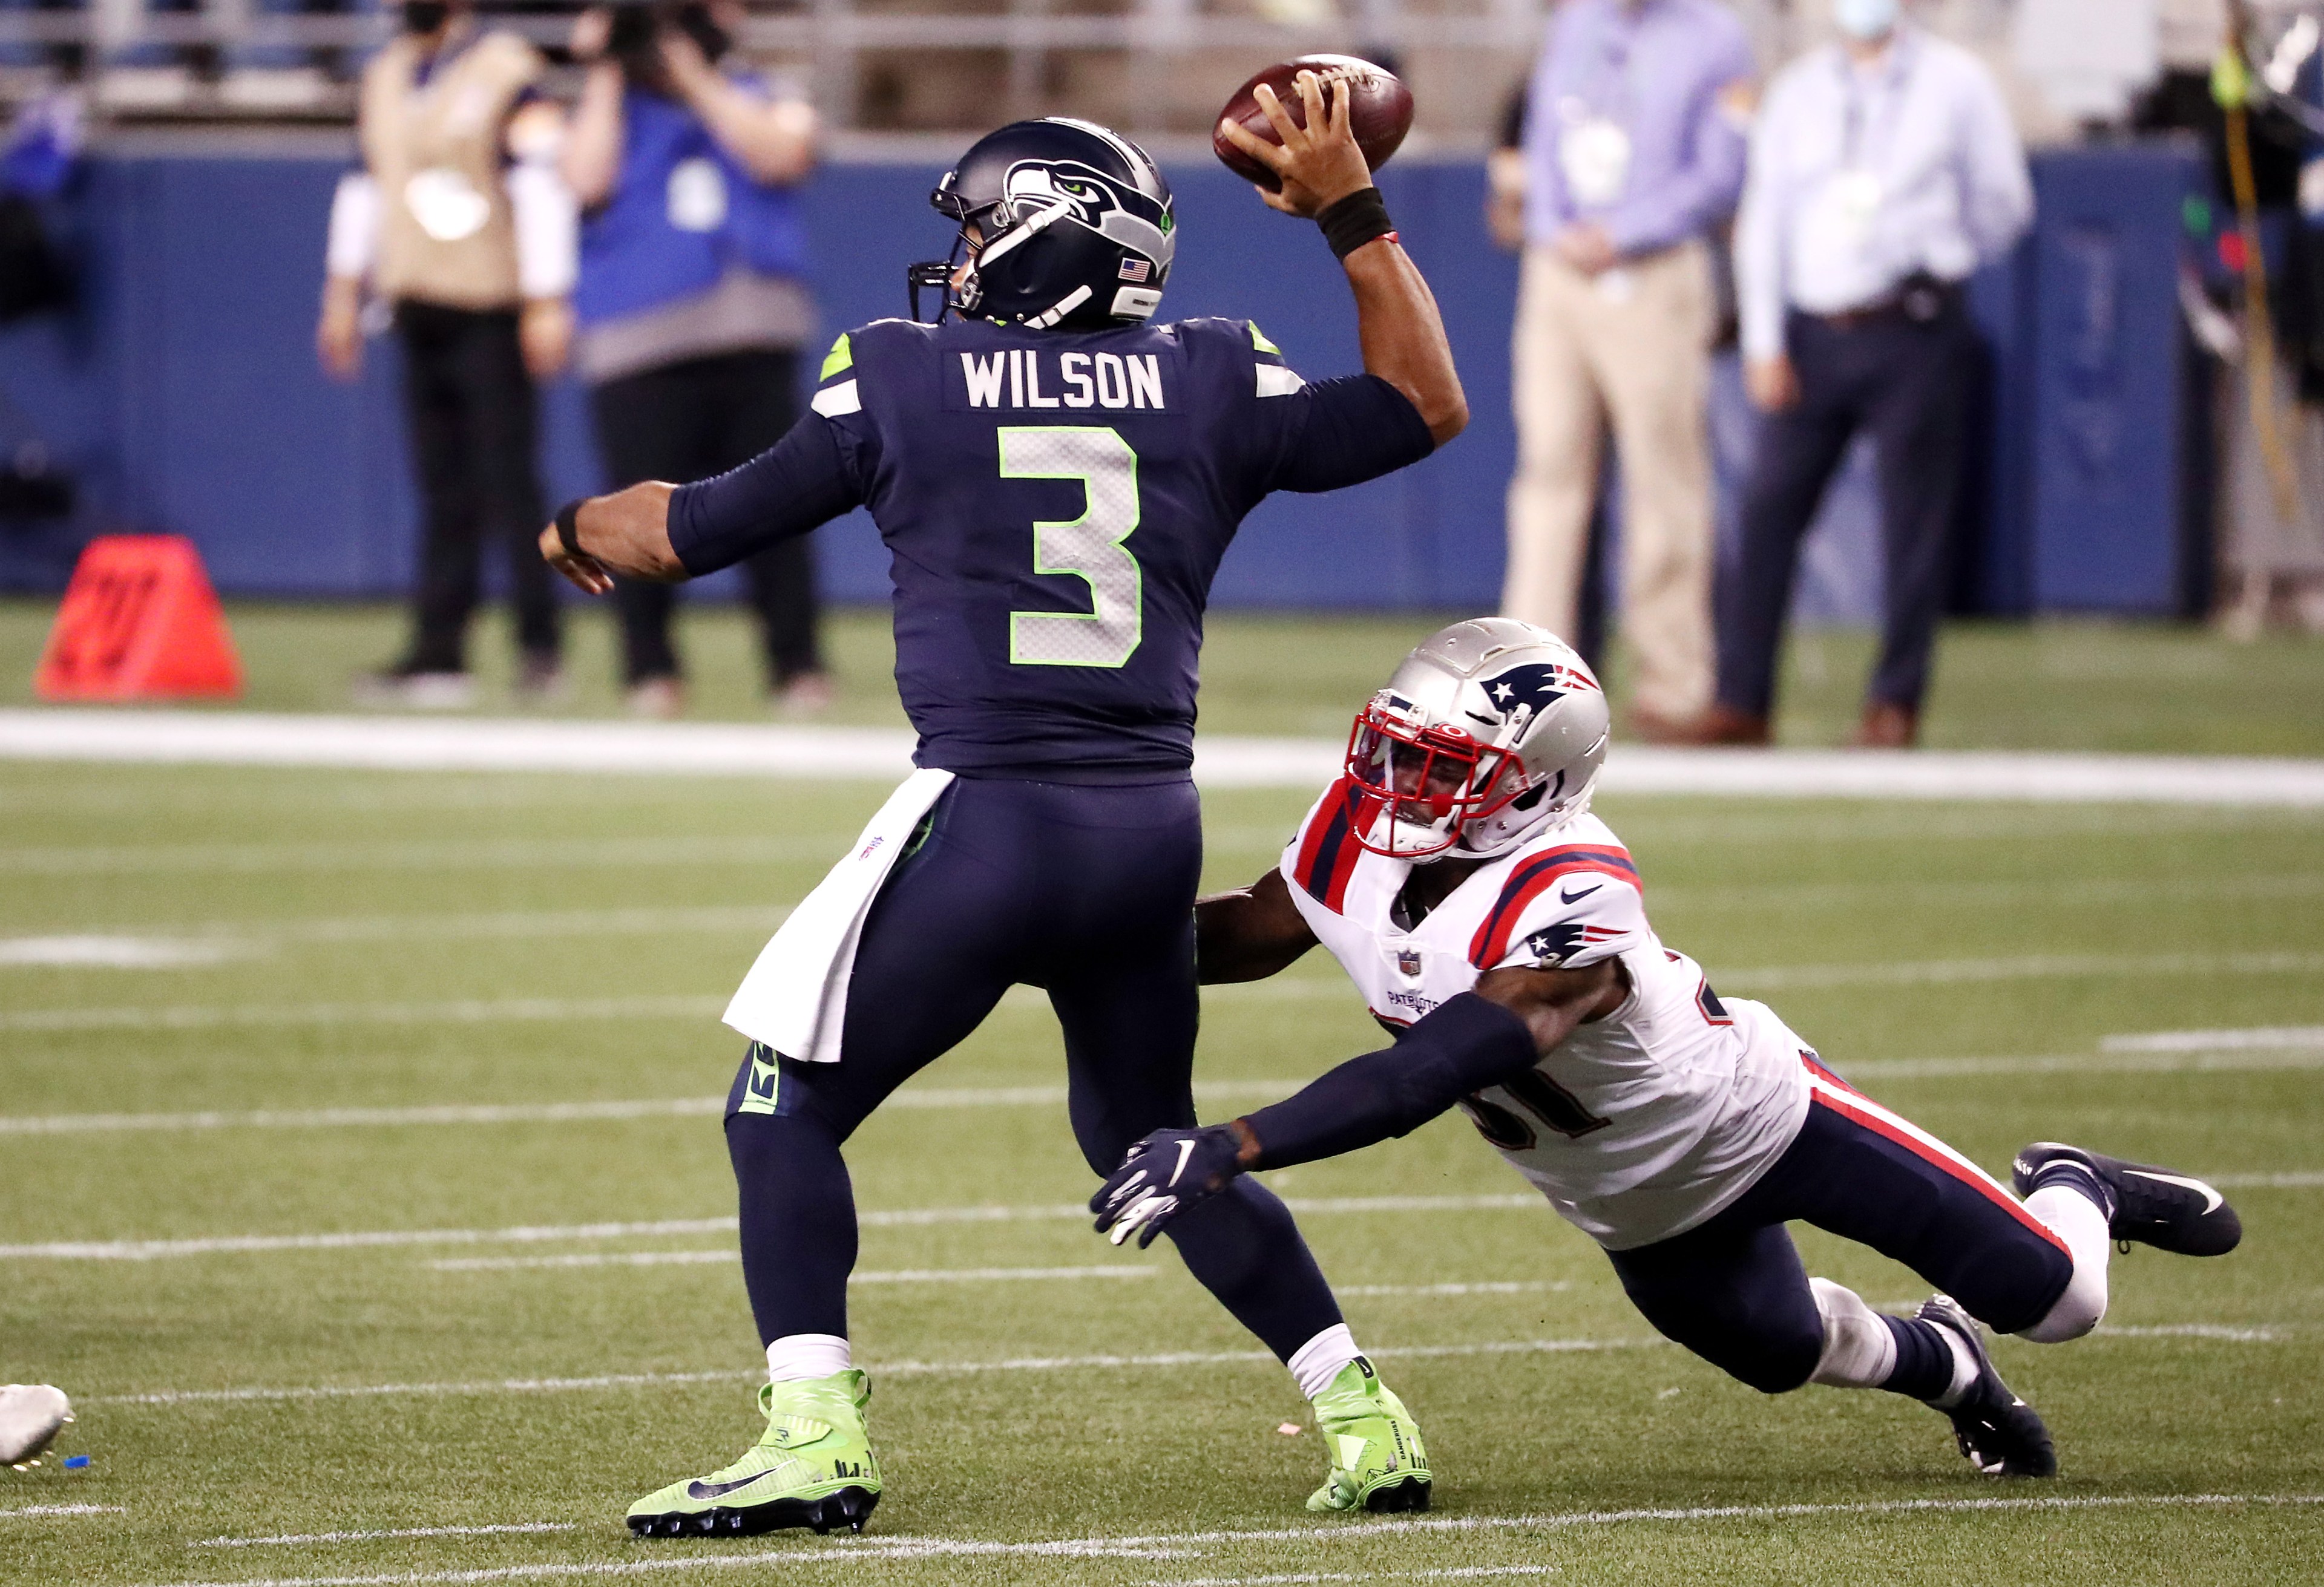 Jonathan Jones #31 of the New England Patriots attempts to tackle Russell Wilson #3 of the Seattle Seahawks